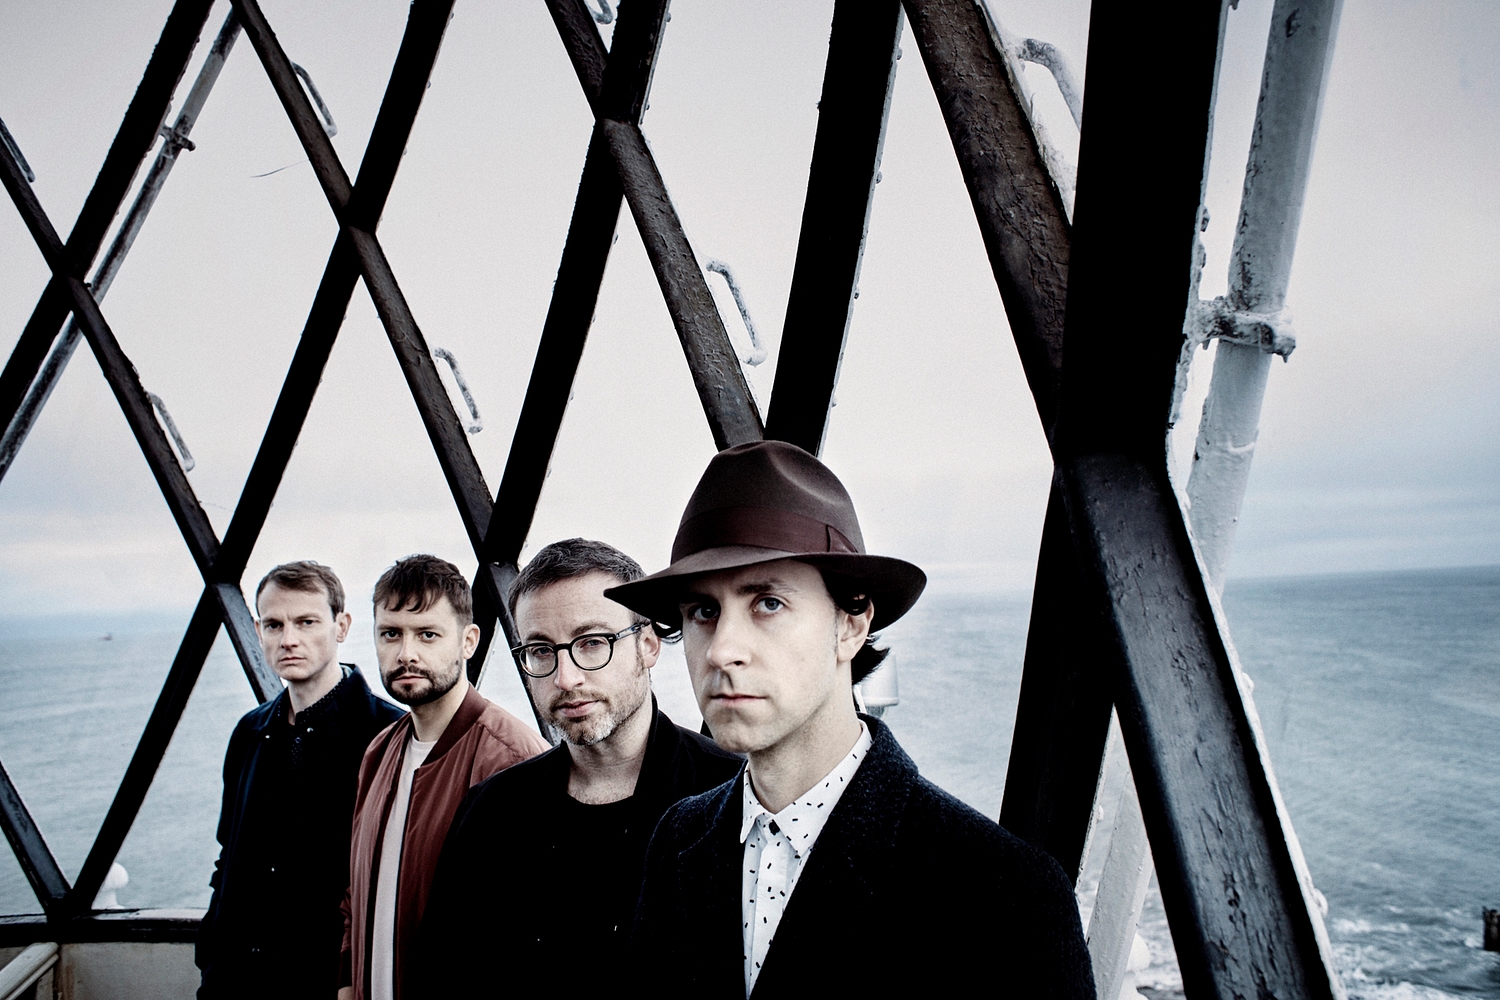 Maximo Park have shared an alternative video for ‘Risk To Exist’